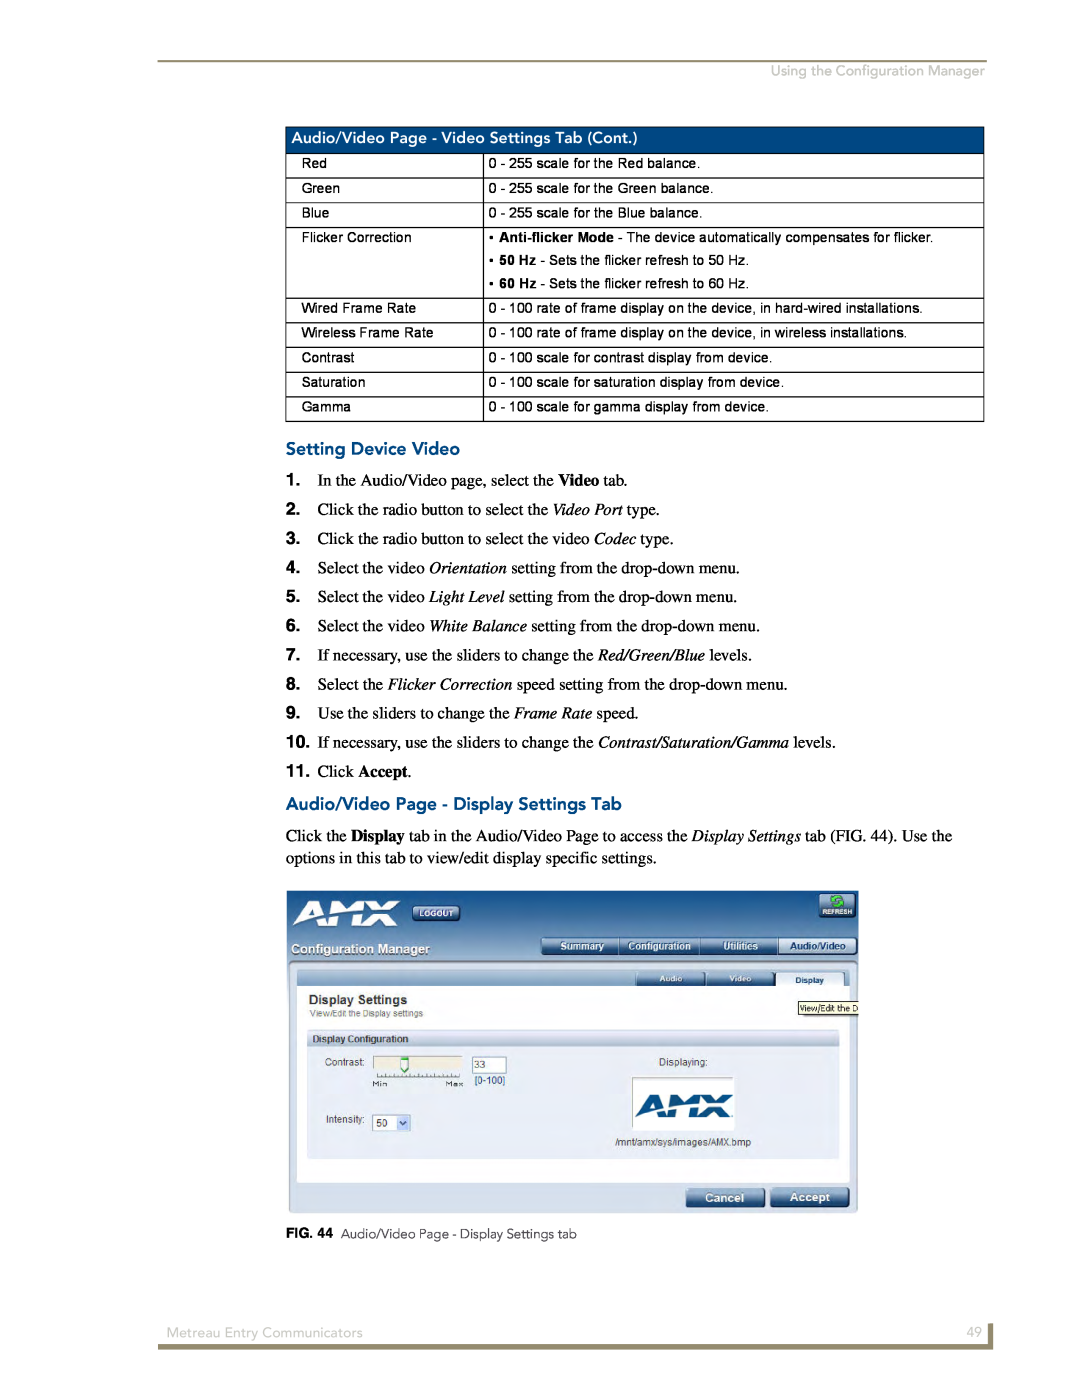 AMX MET-ECOM-D manual Setting Device Video, In the Audio/Video page, select the Video tab 